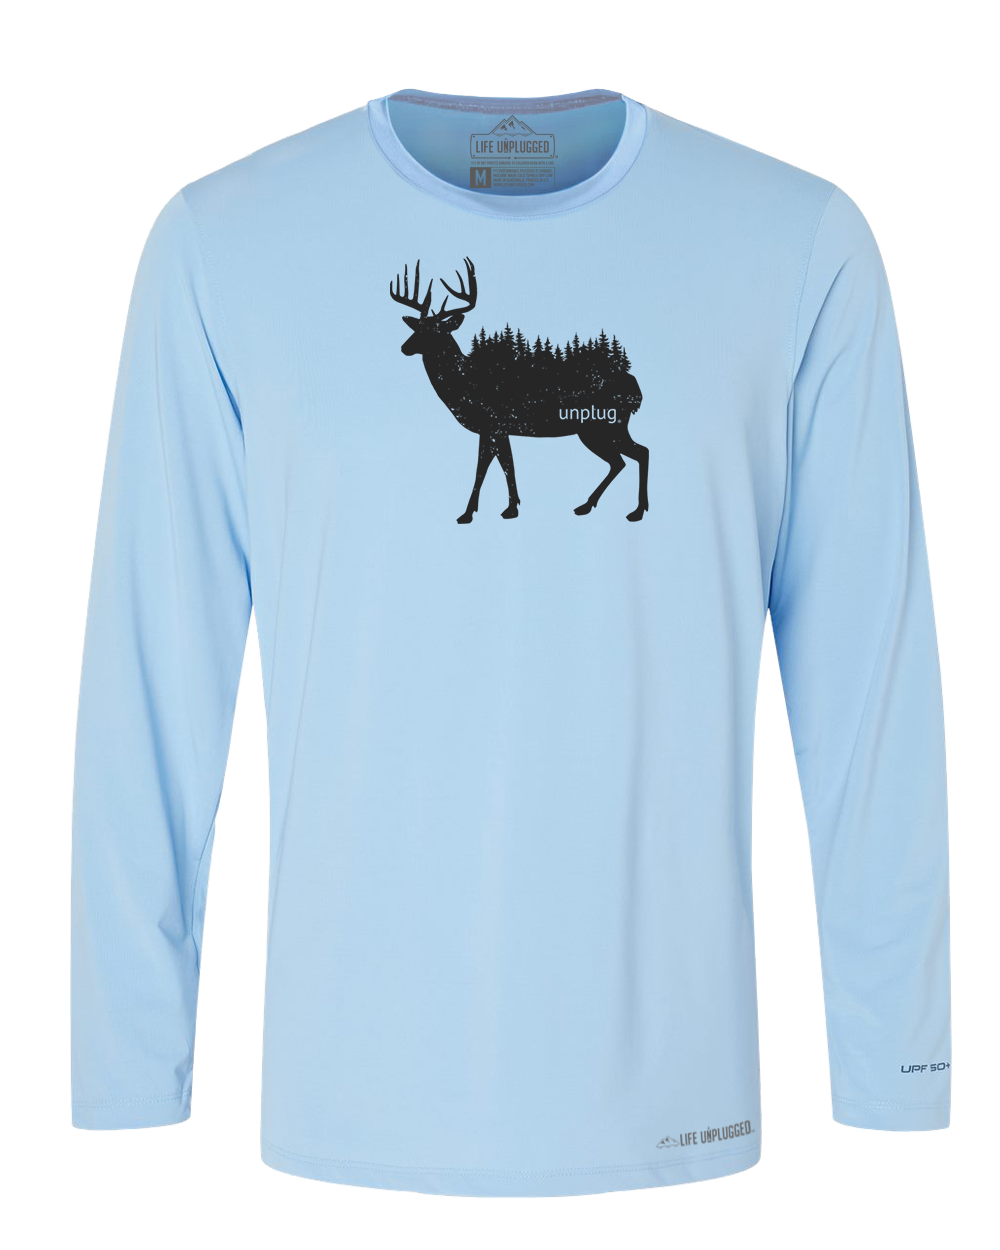 Deer In The Trees Poly/Spandex High Performance Long Sleeve with UPF 50+ - Life Unplugged